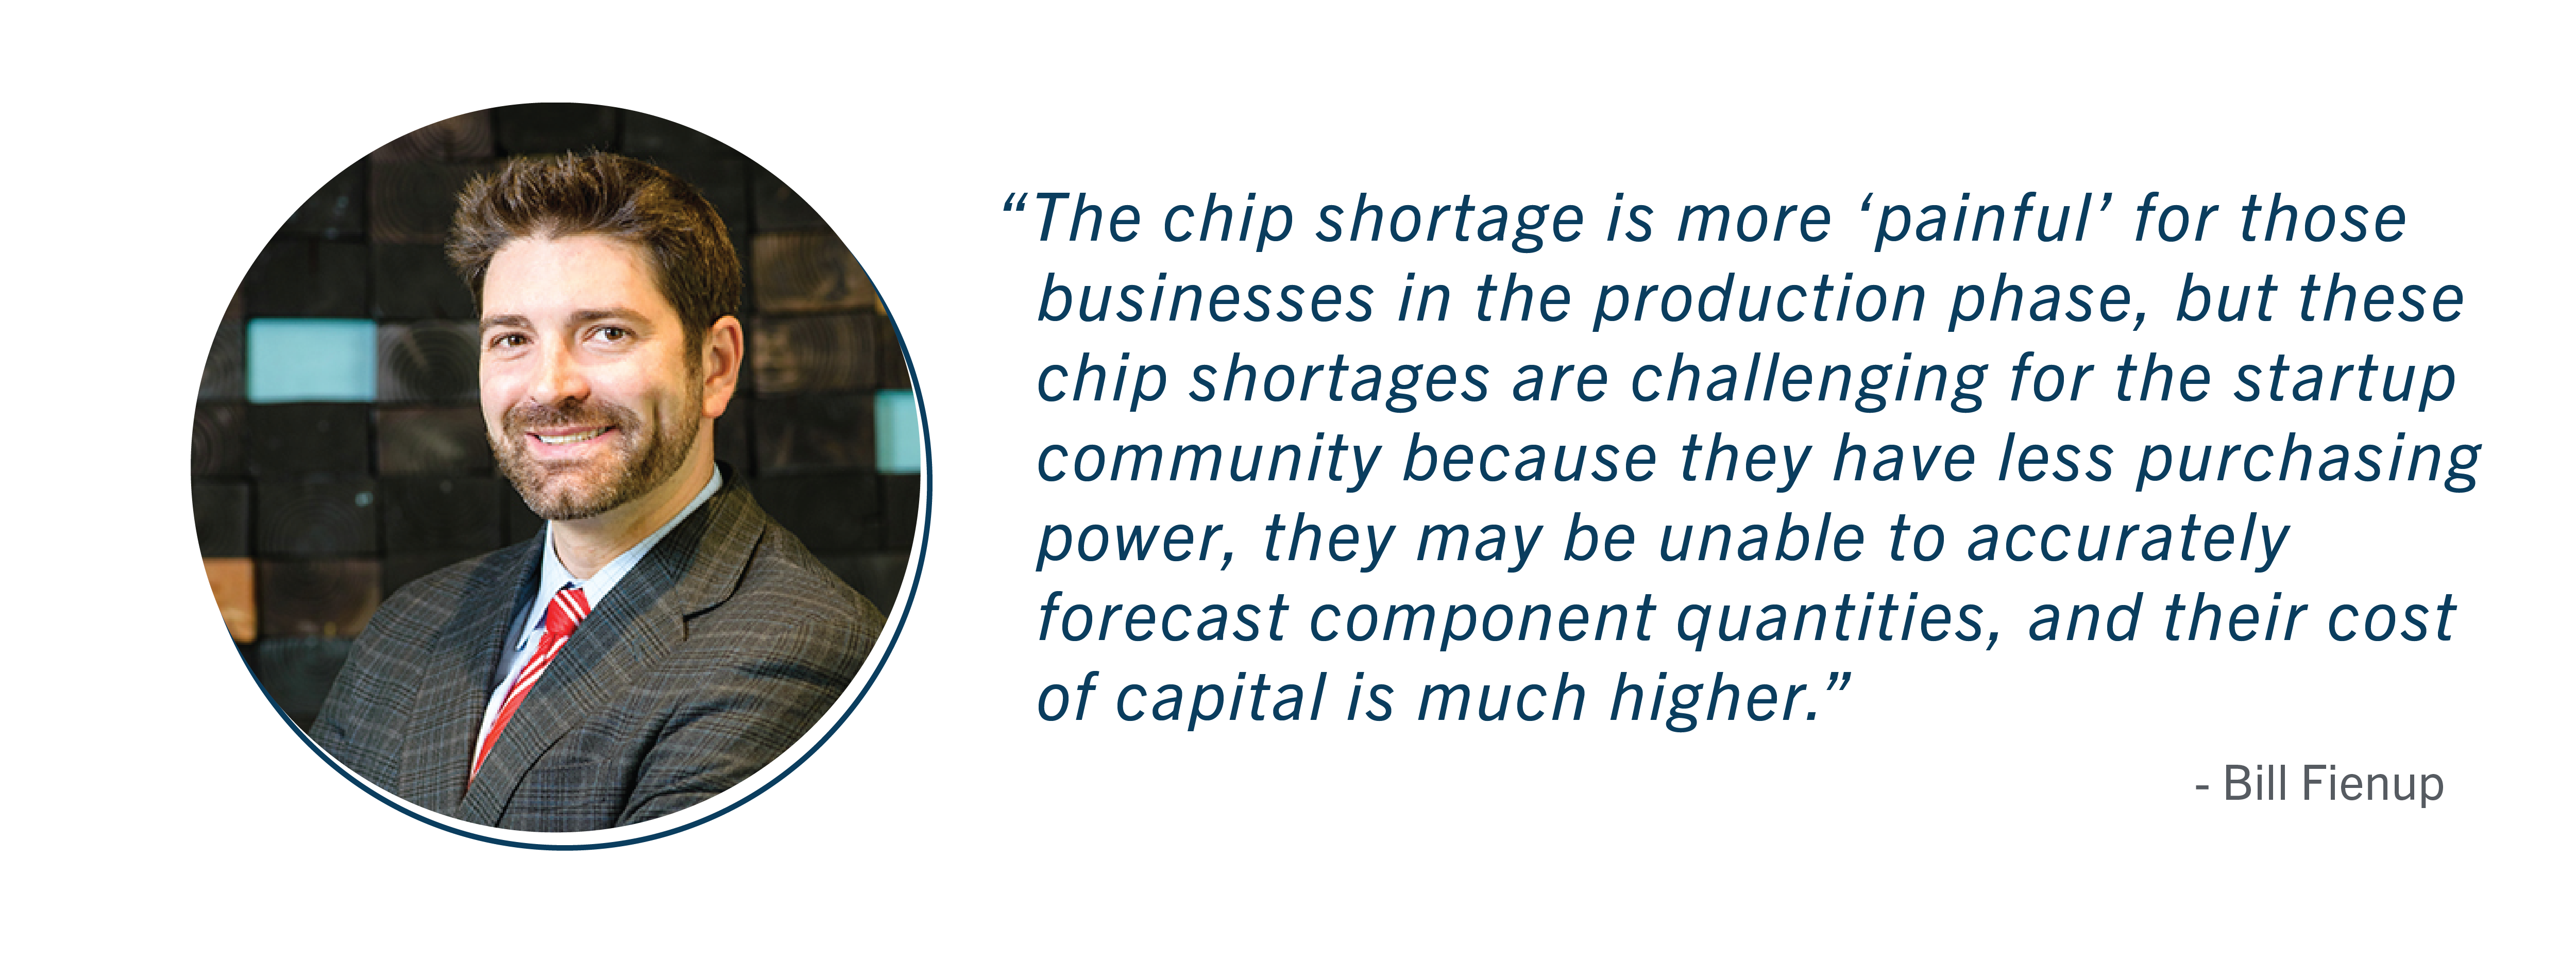 Navigating the Chip Shortage: How Early-Stage and Small Manufacturers are Responding